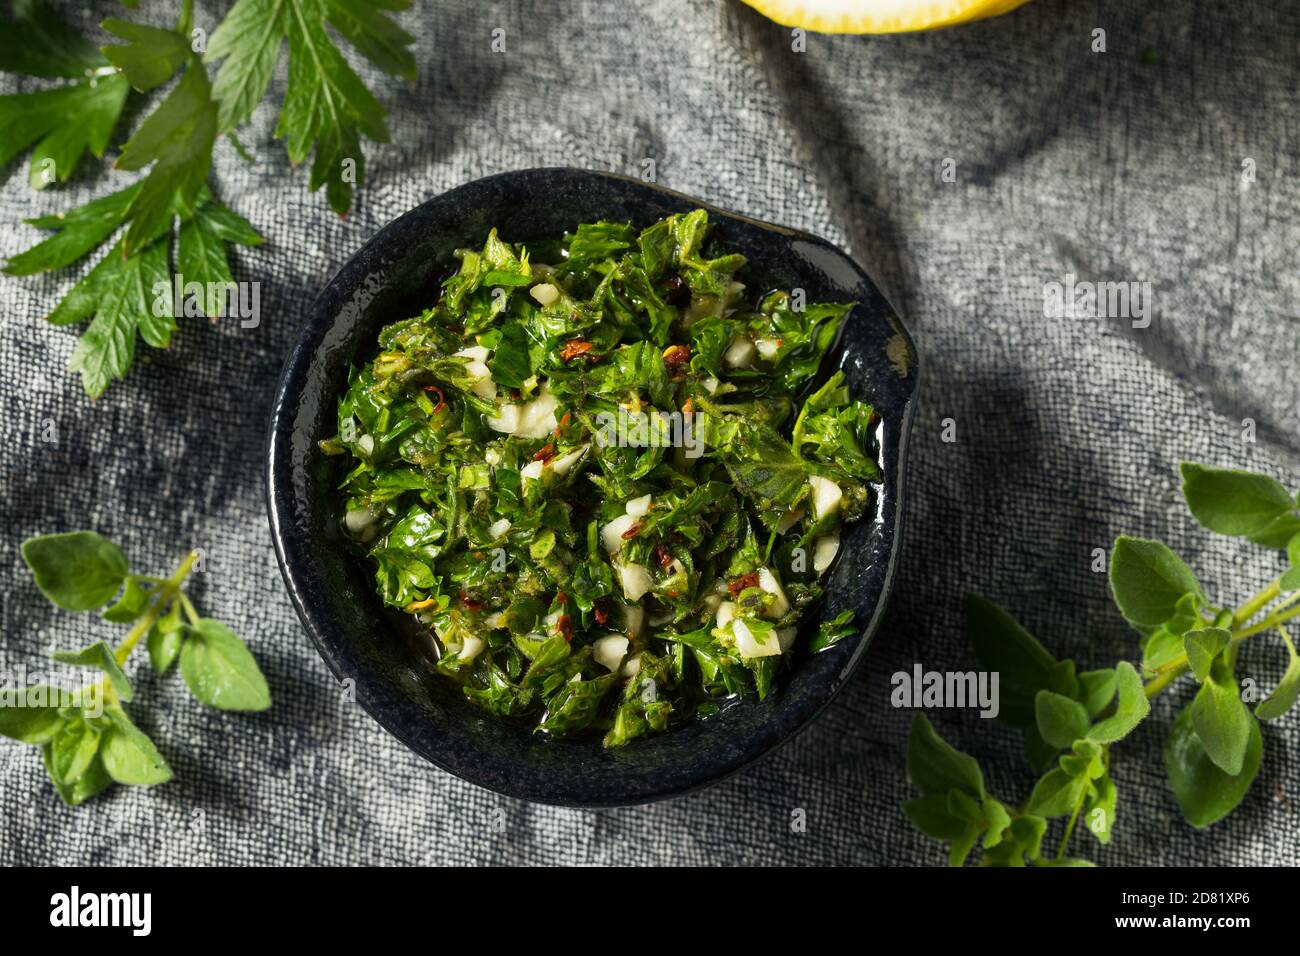 Homemade Spicy Chimichurri Sauce with Parsley and Oregano Stock Photo